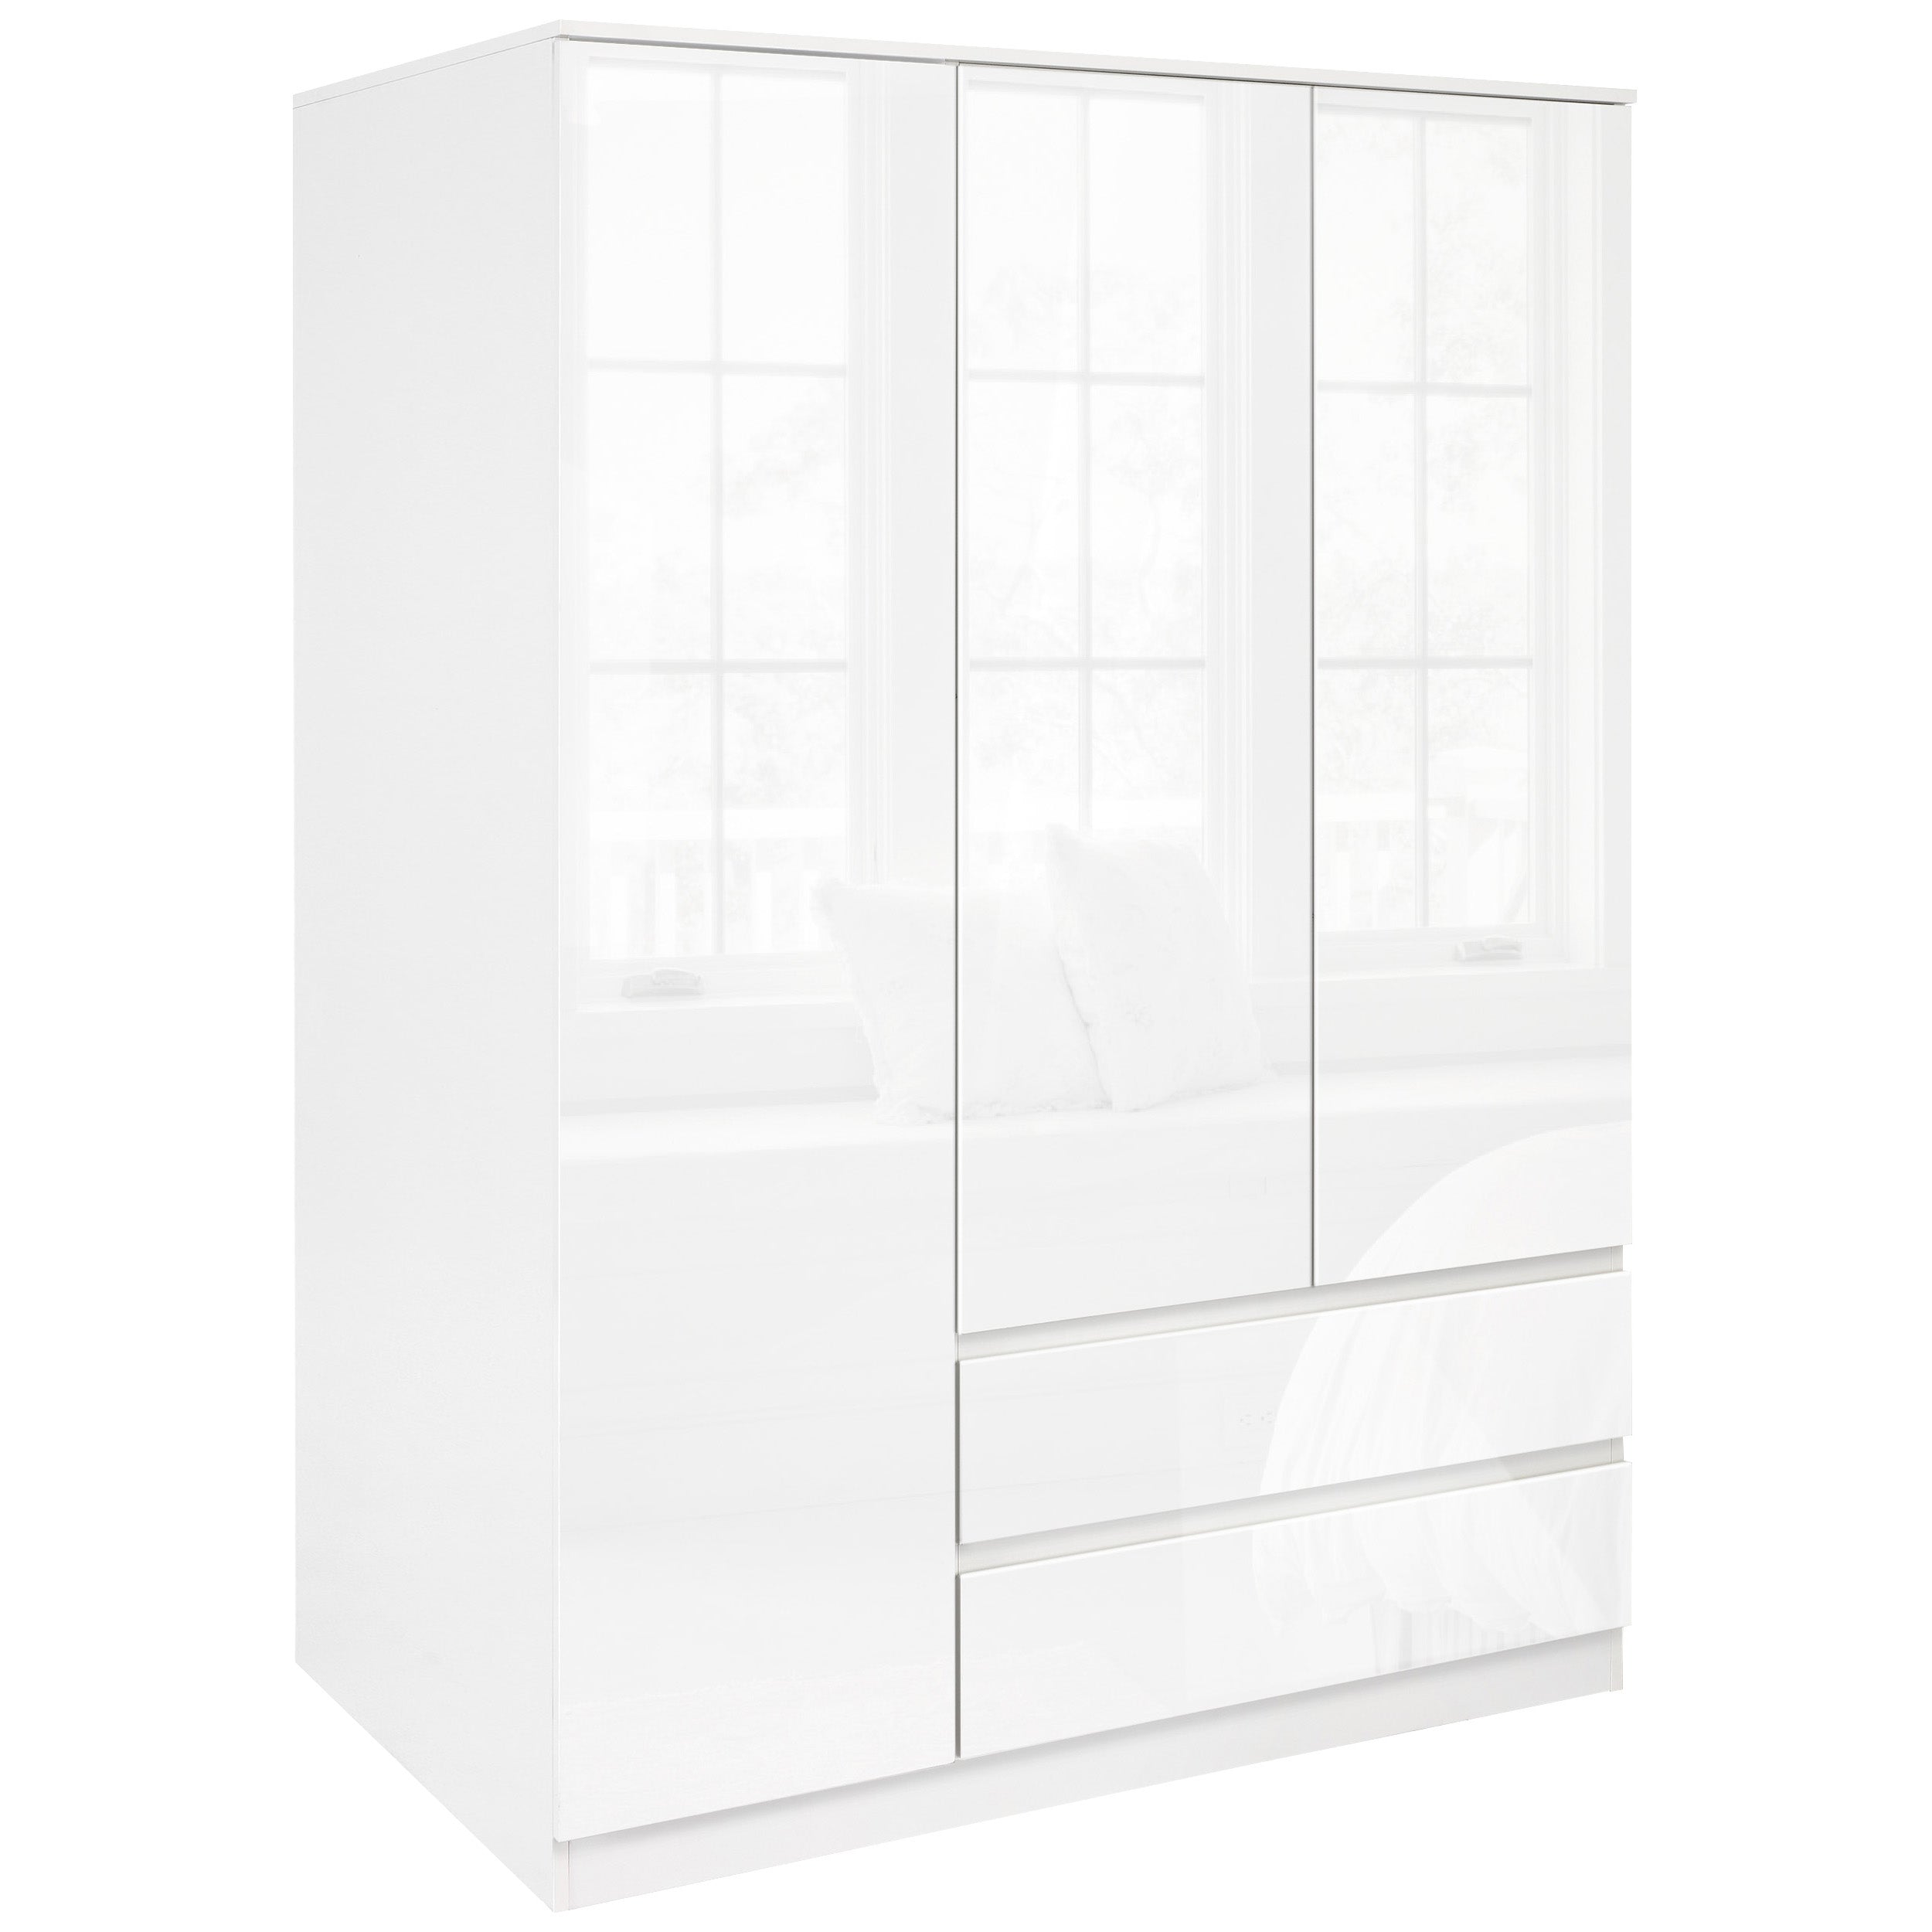 Blisswood High Gloss Bedroom Set (3 Door Wardrobe and 6 Drawer Chest)